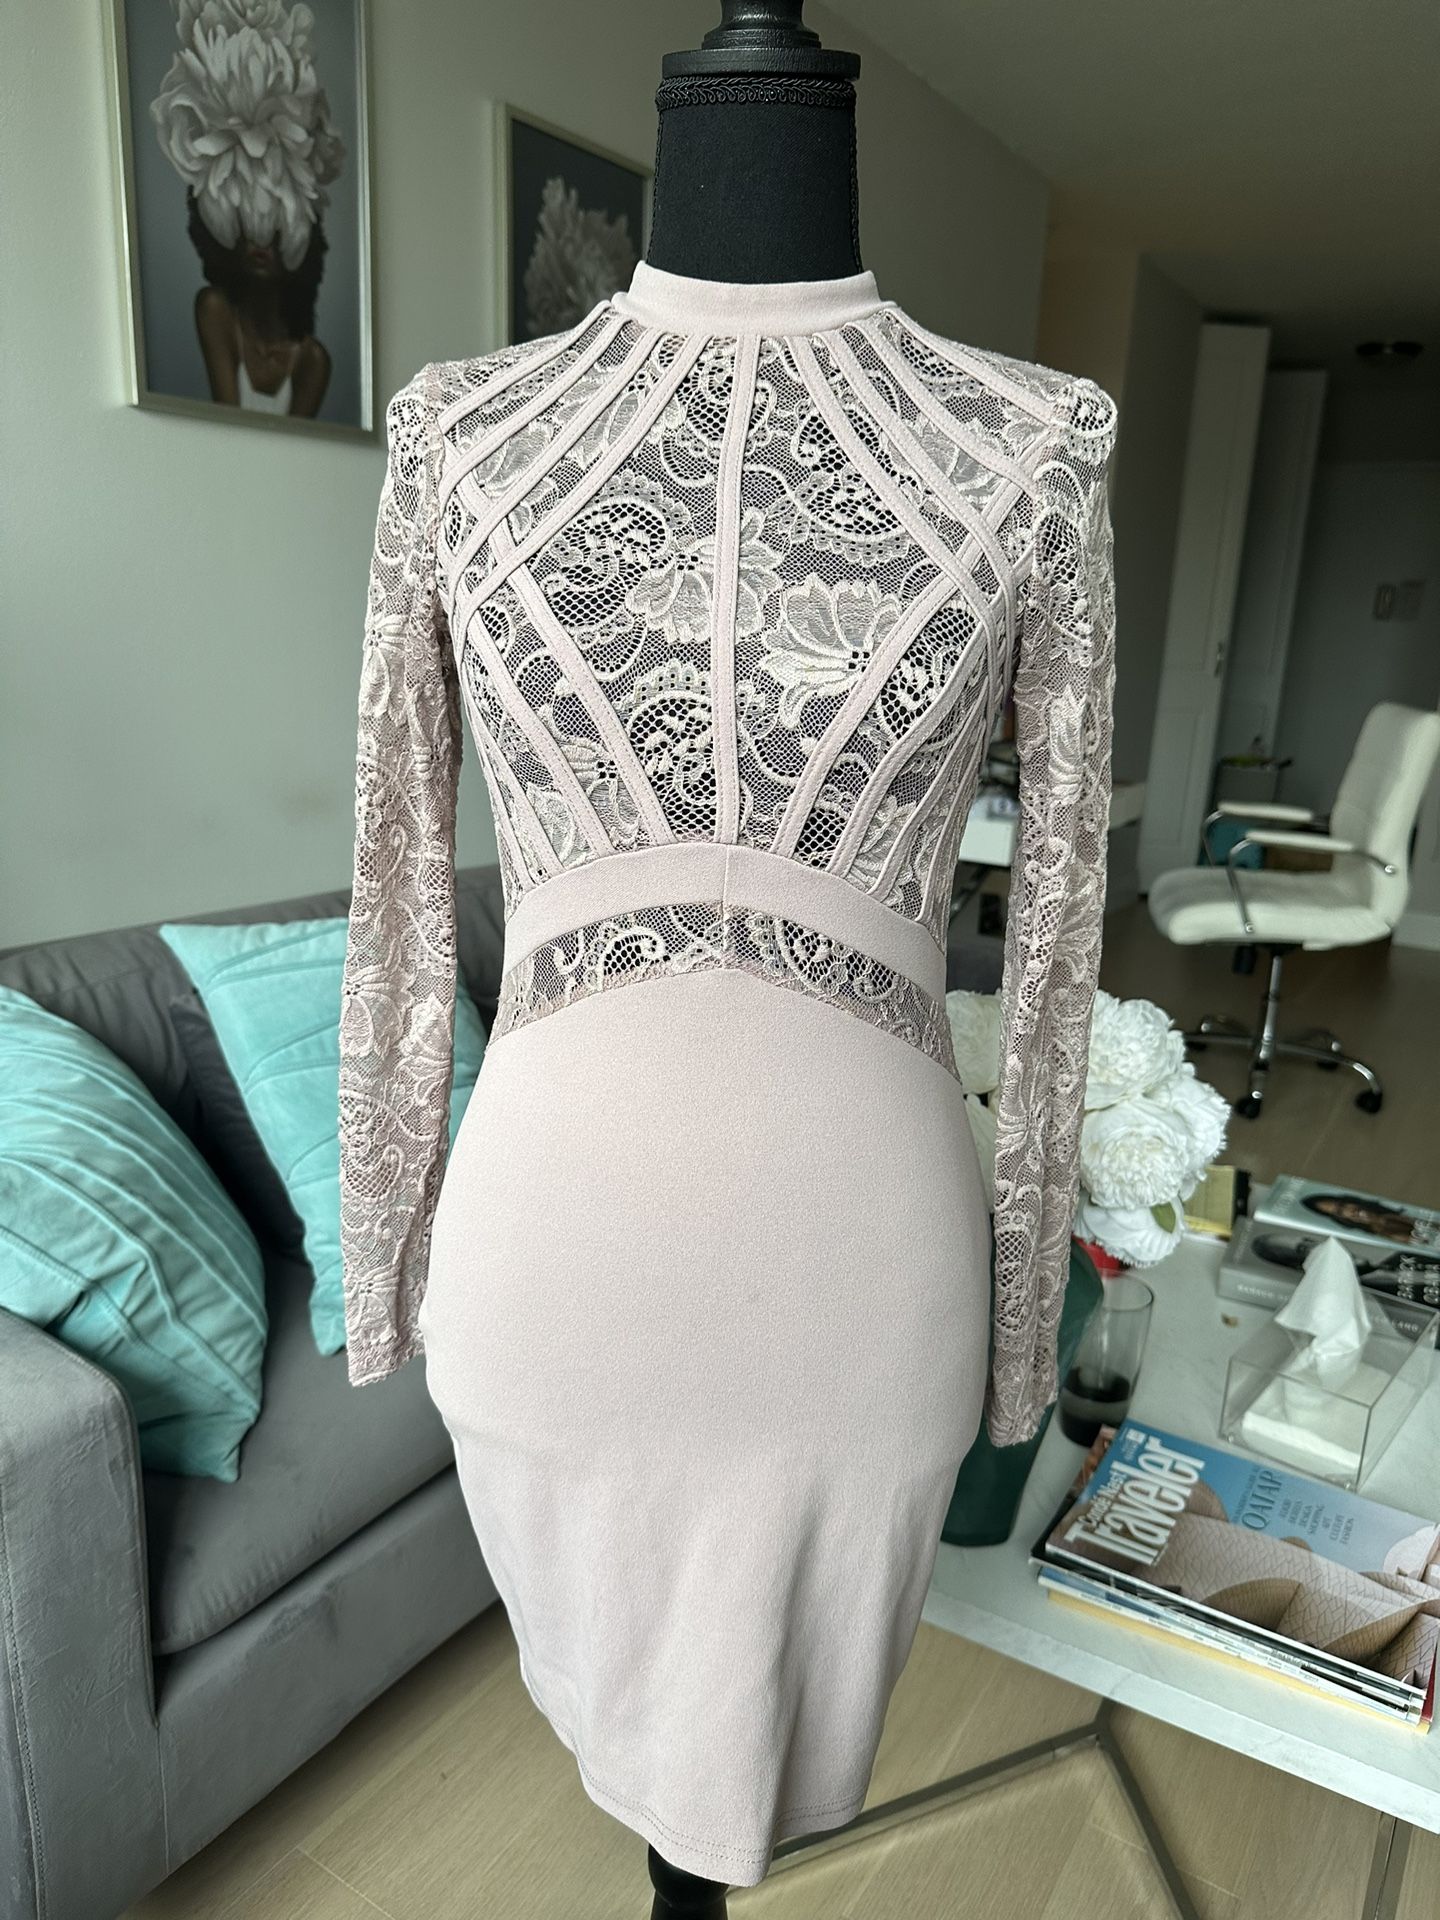 Blush pink bodycon dress with lace detail